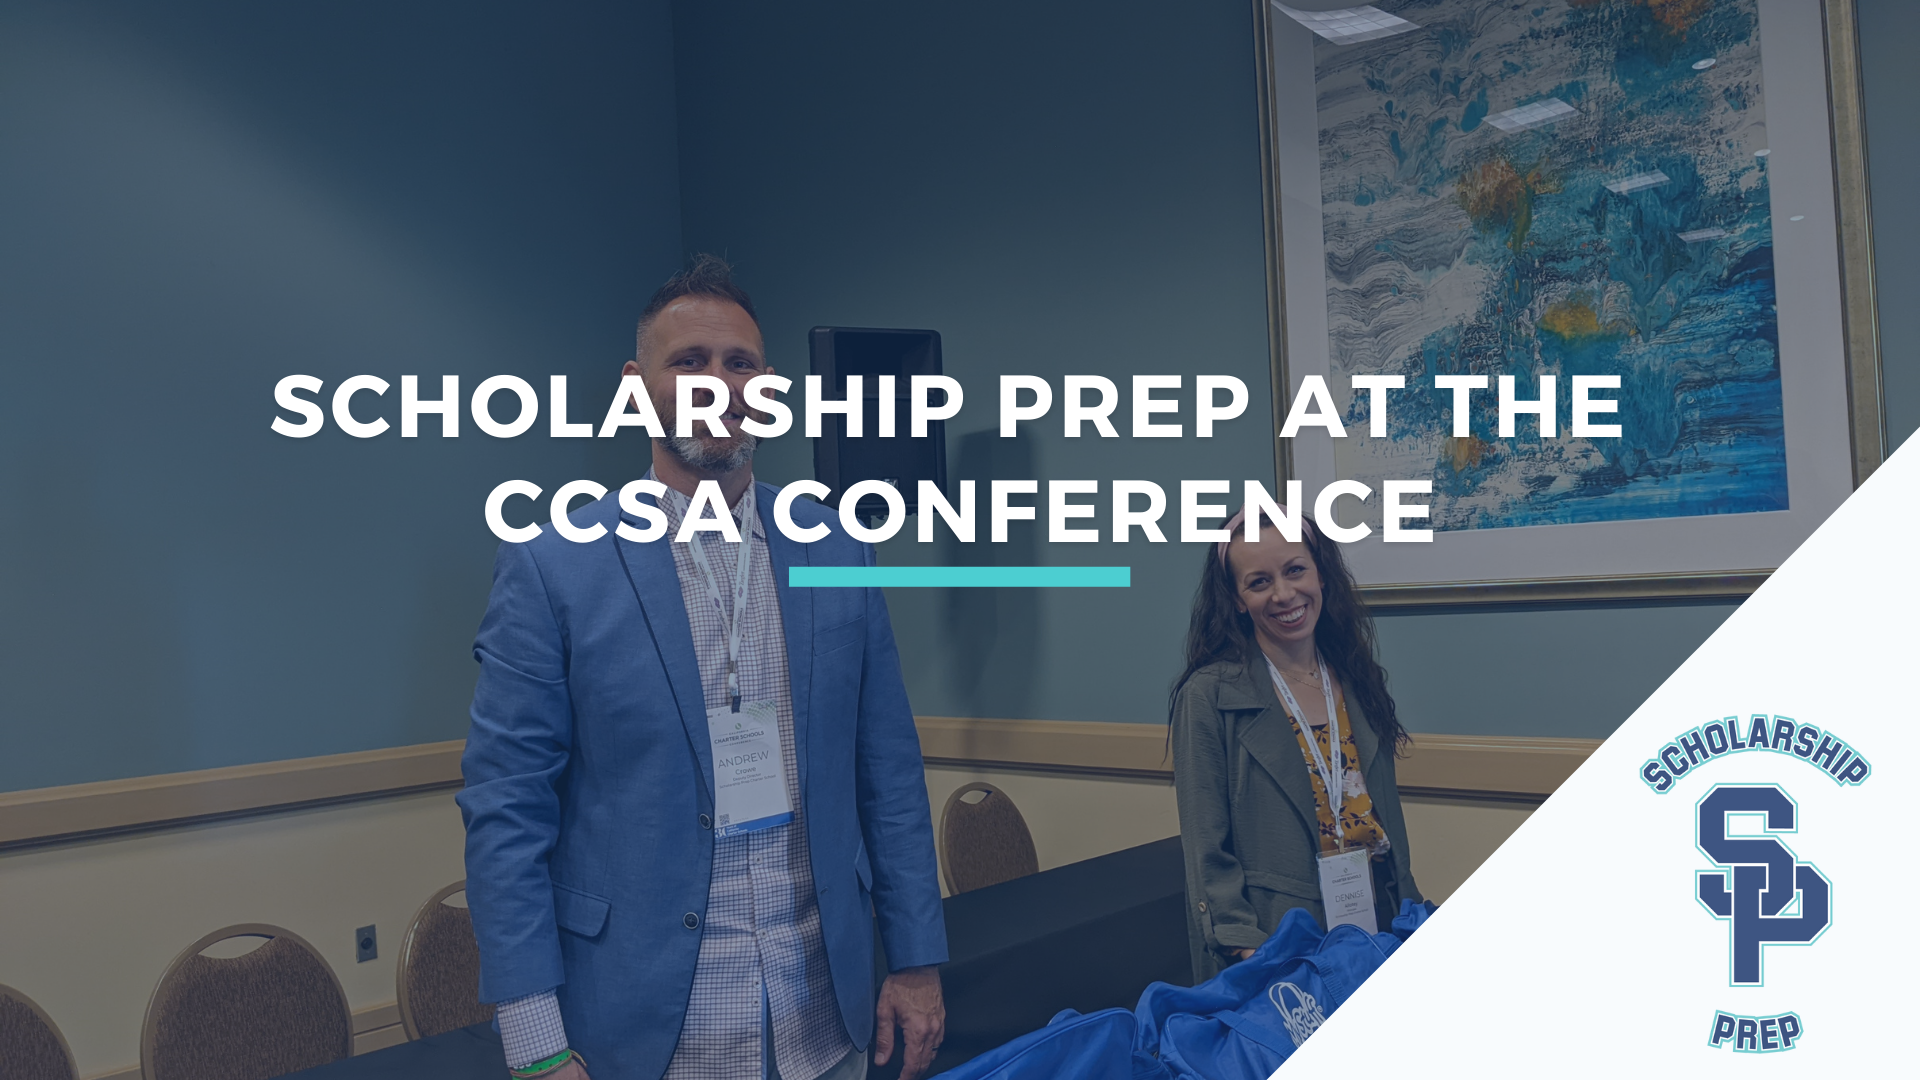 [Video] - Scholarship Prep at the CCSA Conference